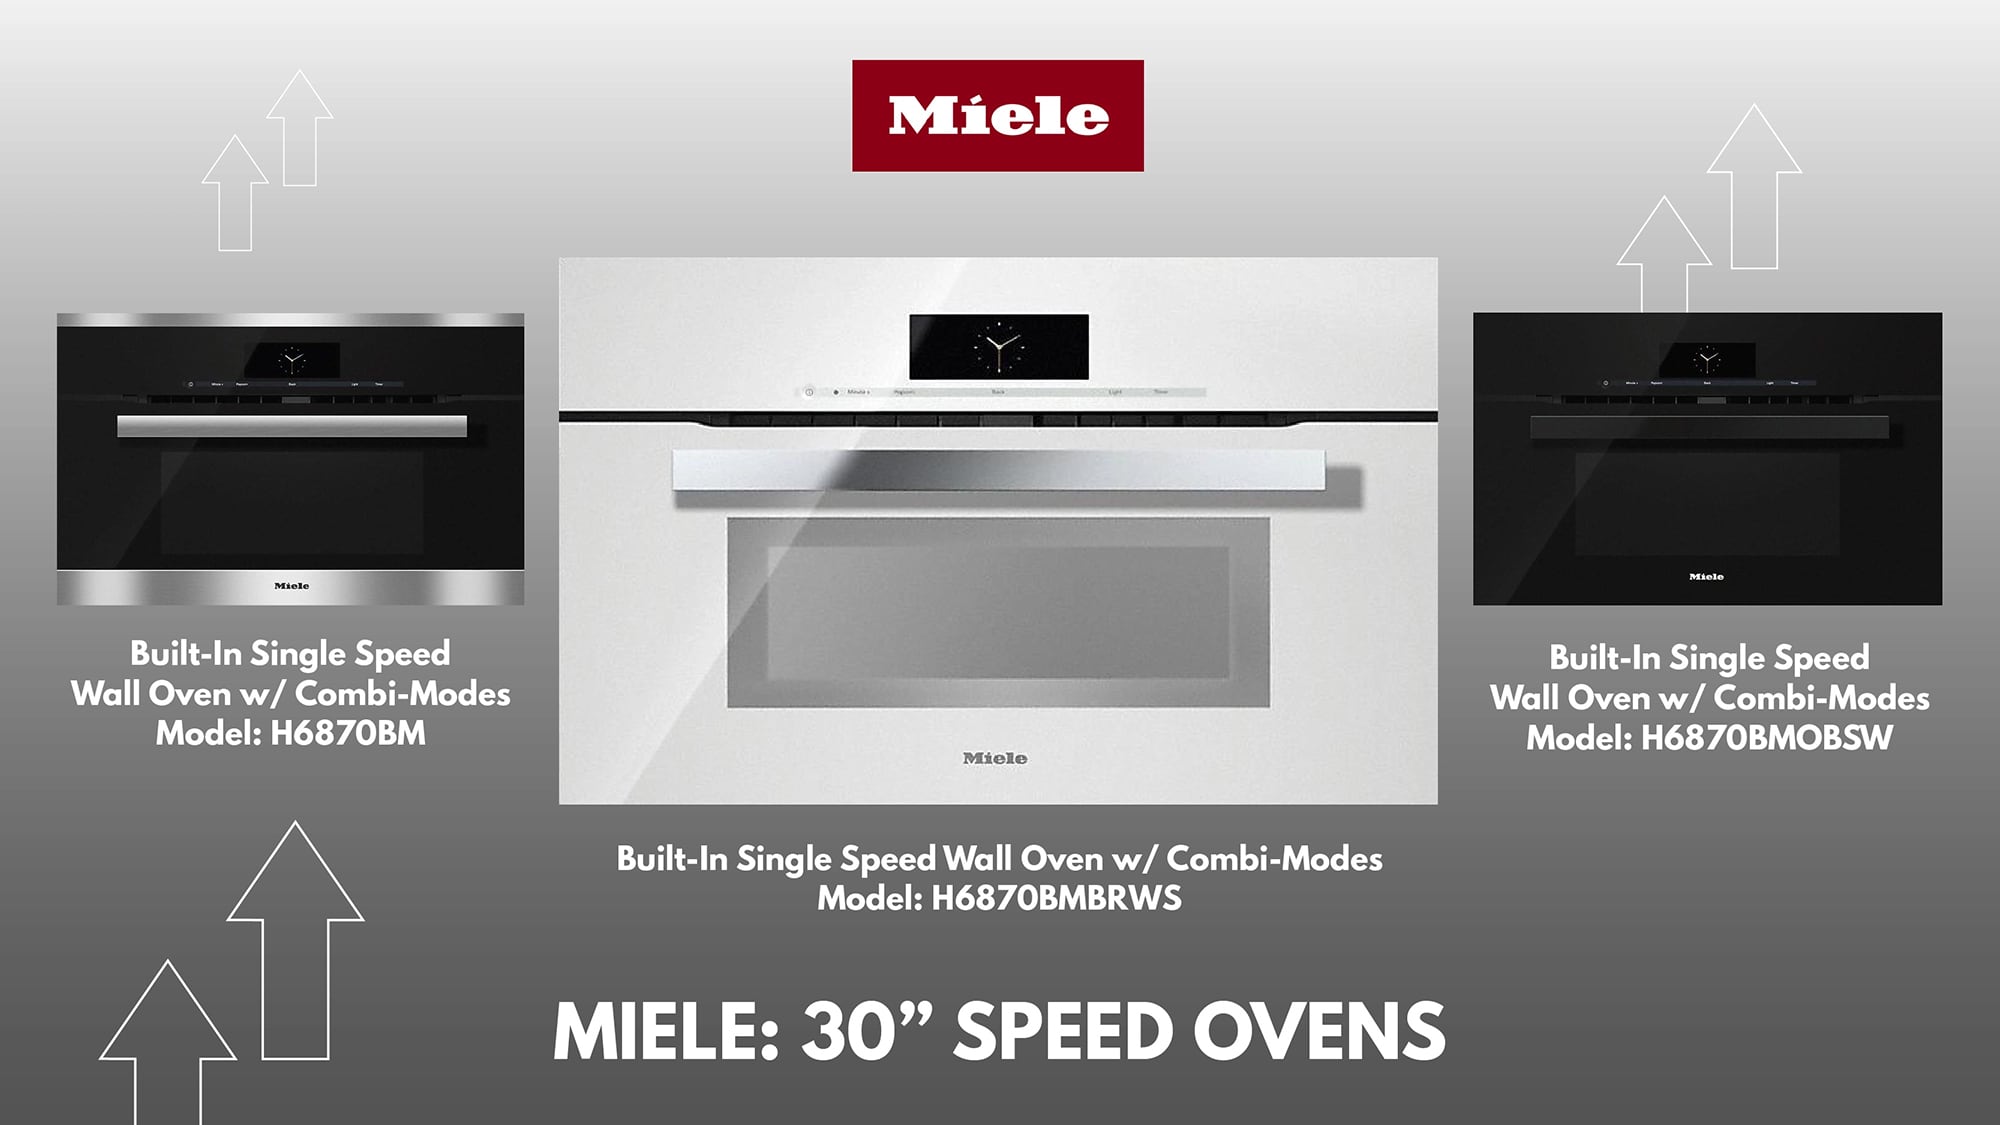 The Best Speed Ovens of 2021 - Which One Is Best for You?